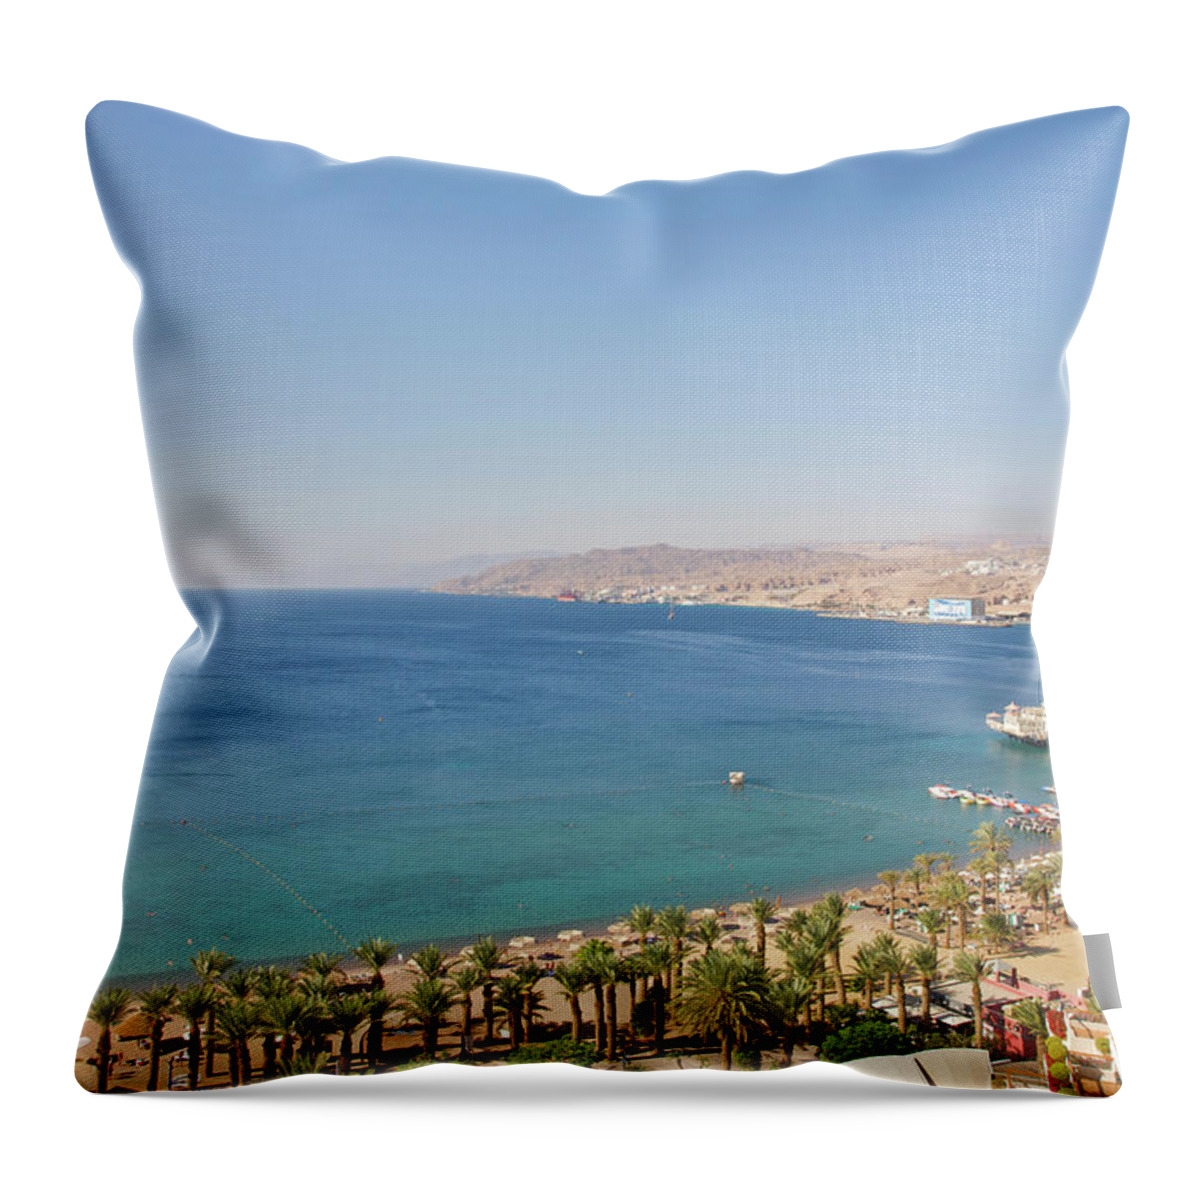 Tranquility Throw Pillow featuring the photograph View From High Up Of Eilat Shoreline by Barry Winiker